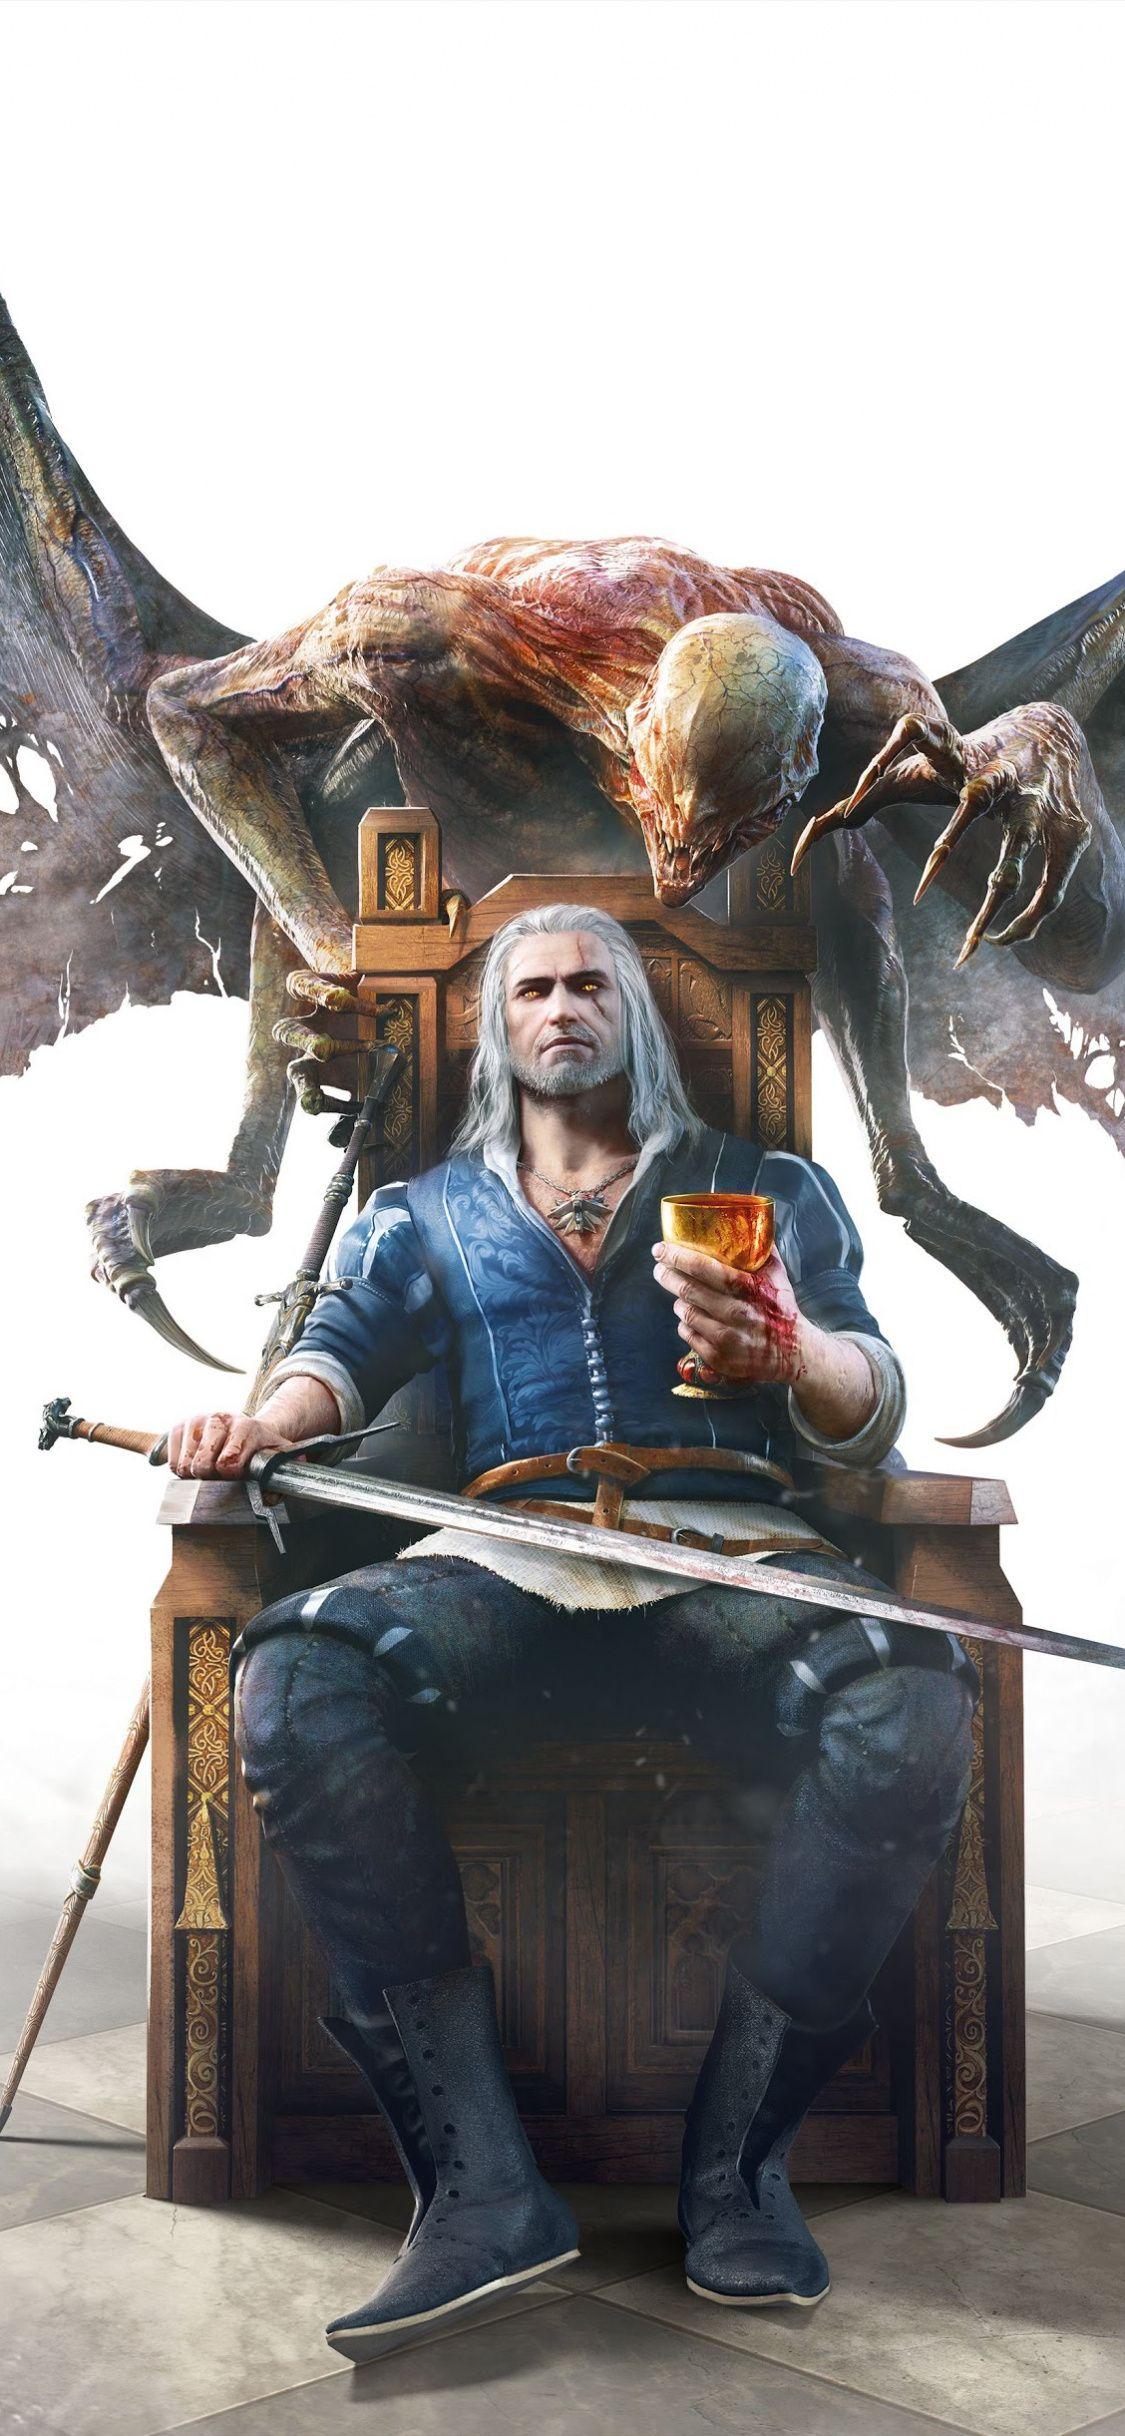 Witcher 3 Iphone Wallpapers Top Free Witcher 3 Iphone Backgrounds Wallpaperaccess